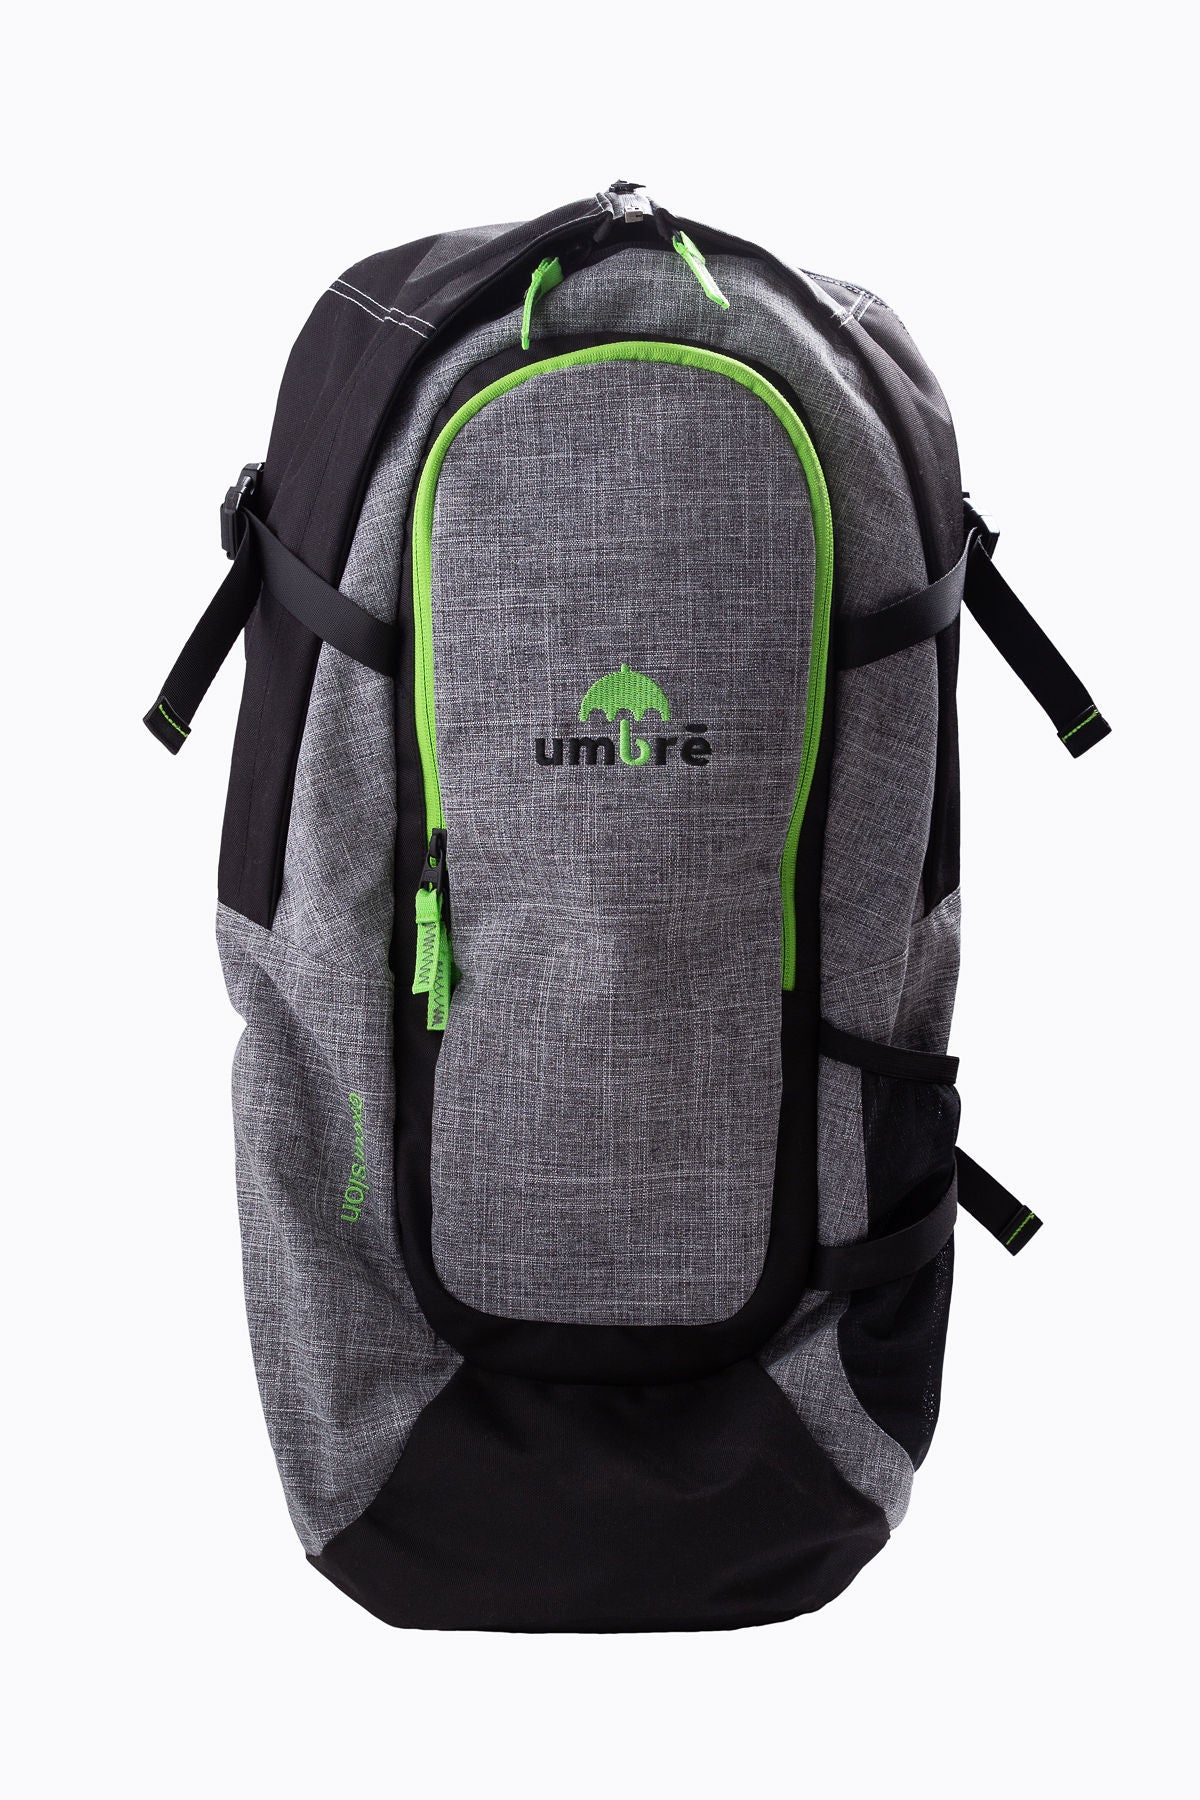 Umbre Excursion Backpack product image, grey with black and green highlights , full size backpack